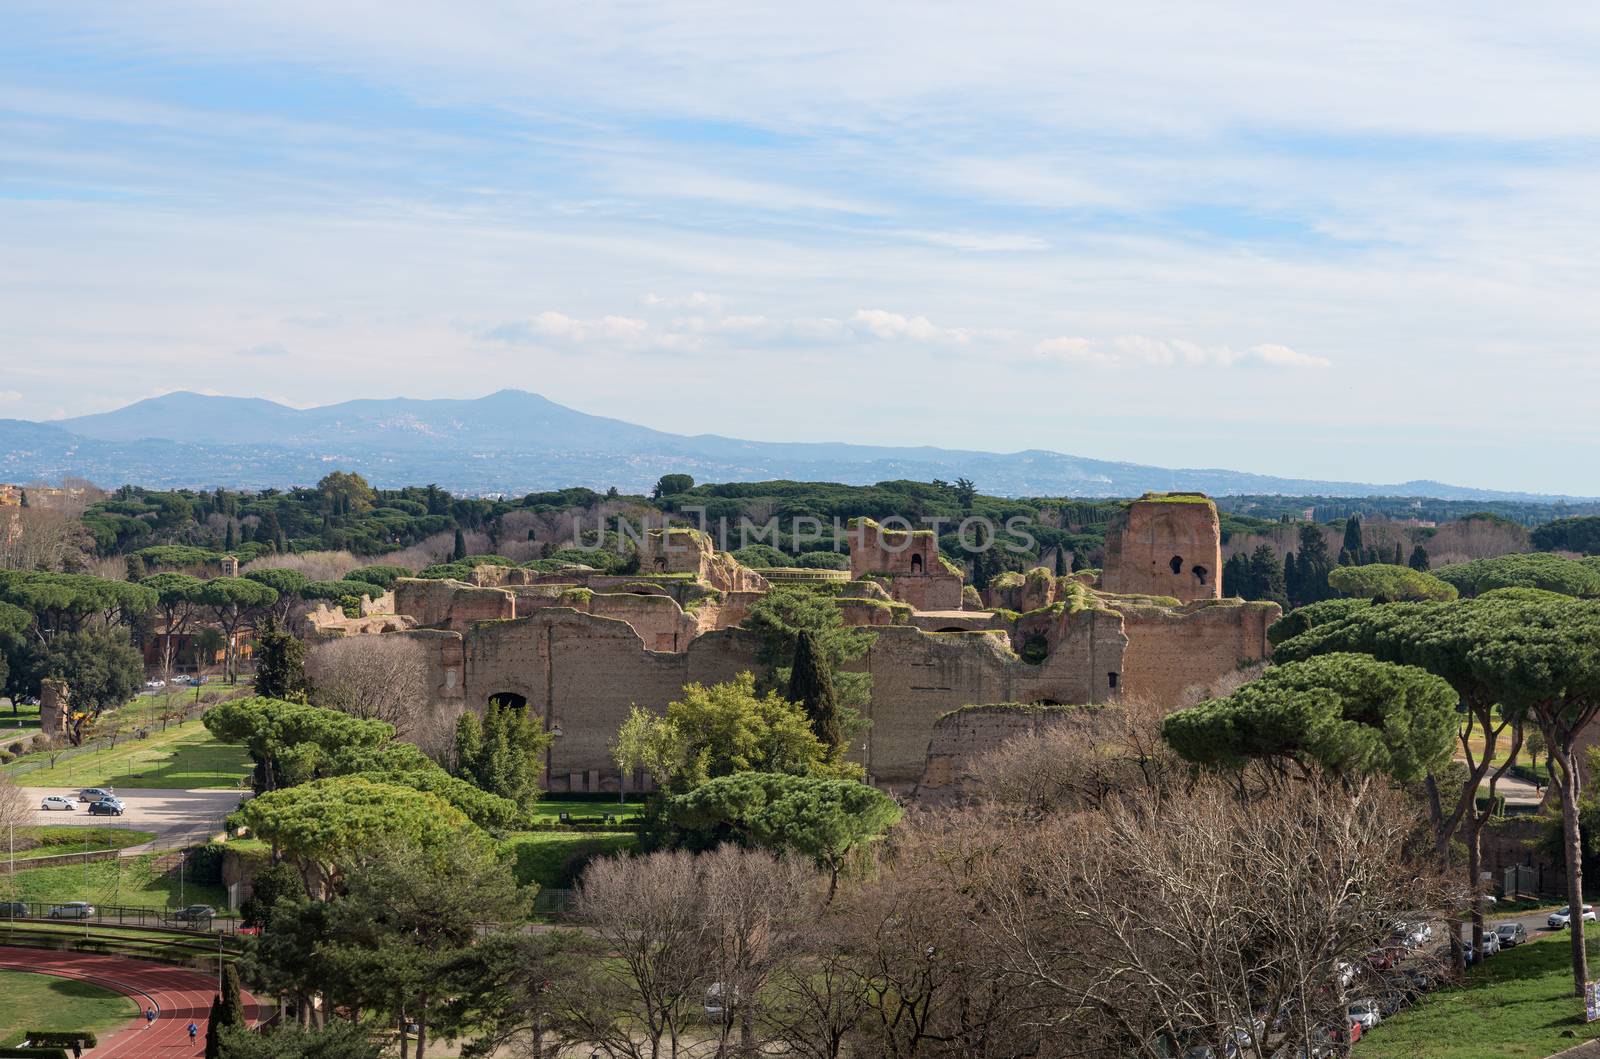 Ruins of ancient Roman Baths of Caracalla, a thermal complex next to Circo Massimo in Rome, Italy, seen from the FAO building terrace